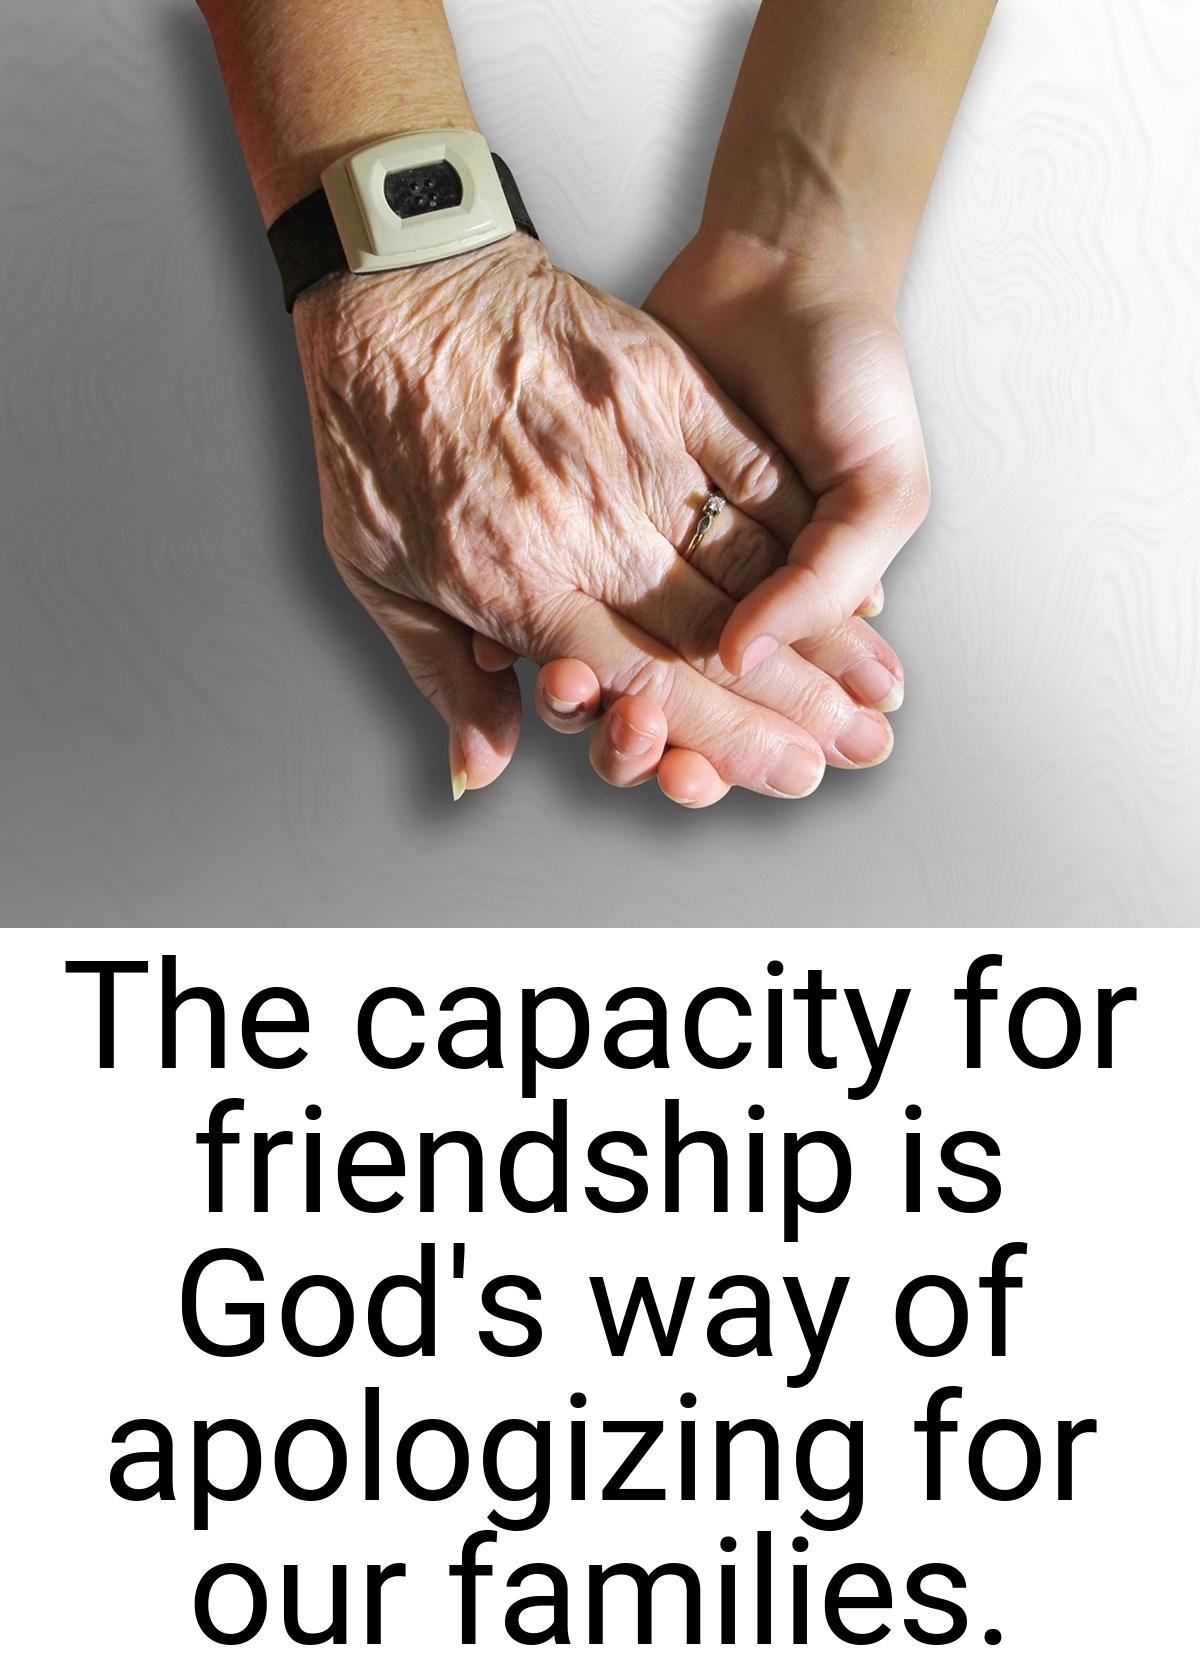 The capacity for friendship is God's way of apologizing for